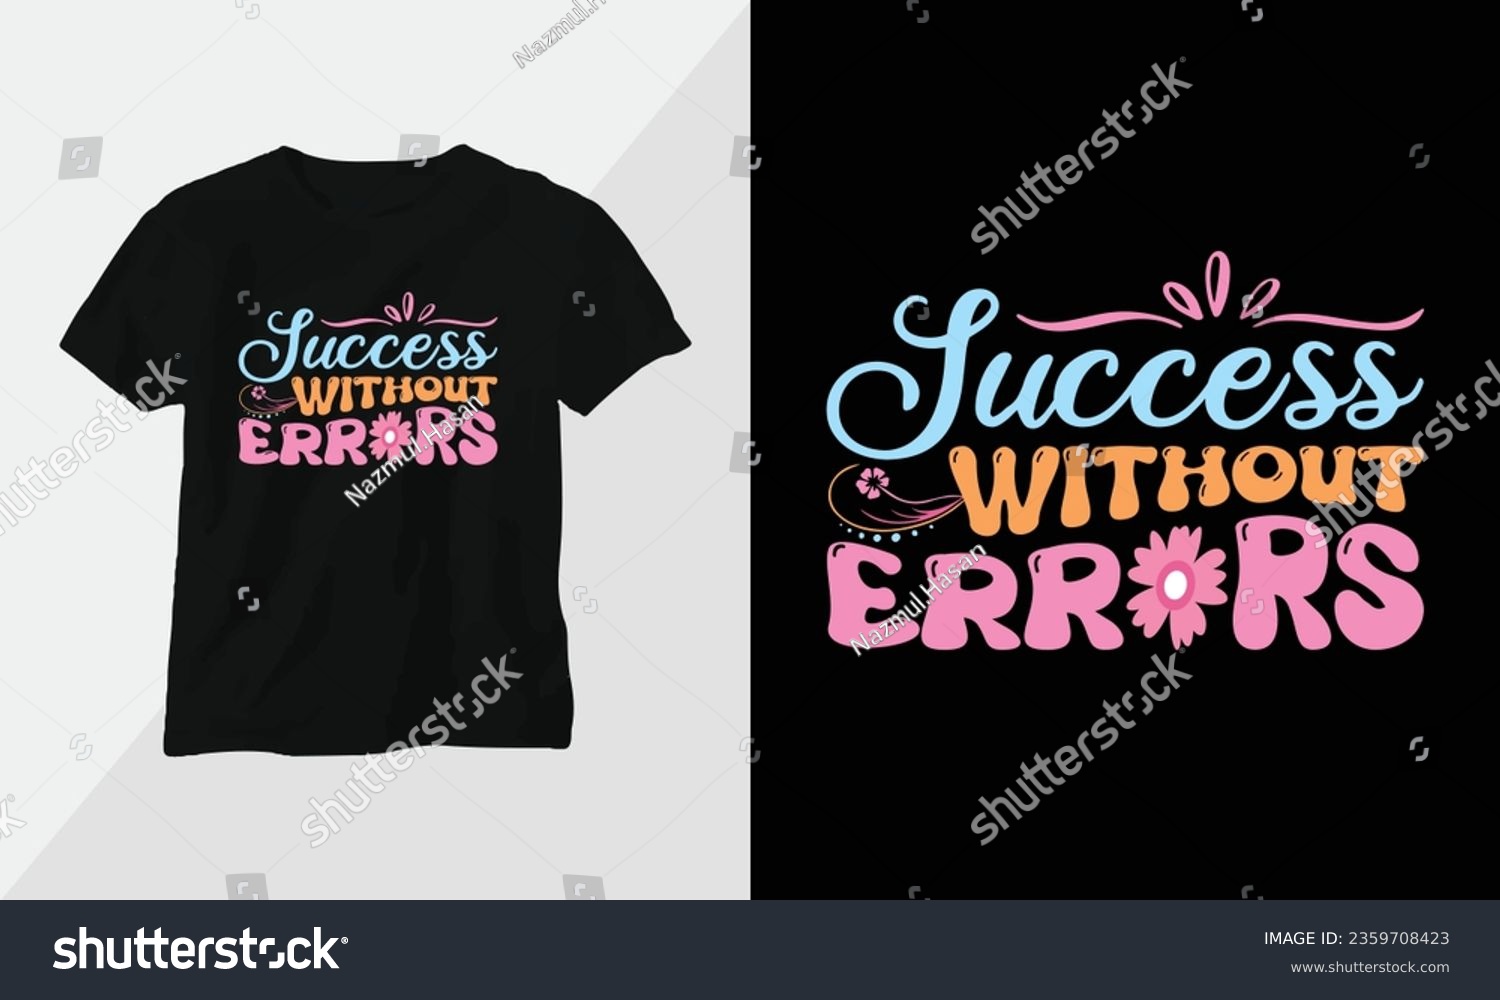 SVG of Success without errors - Retro Groovy Inspirational T-shirt Design with retro style svg